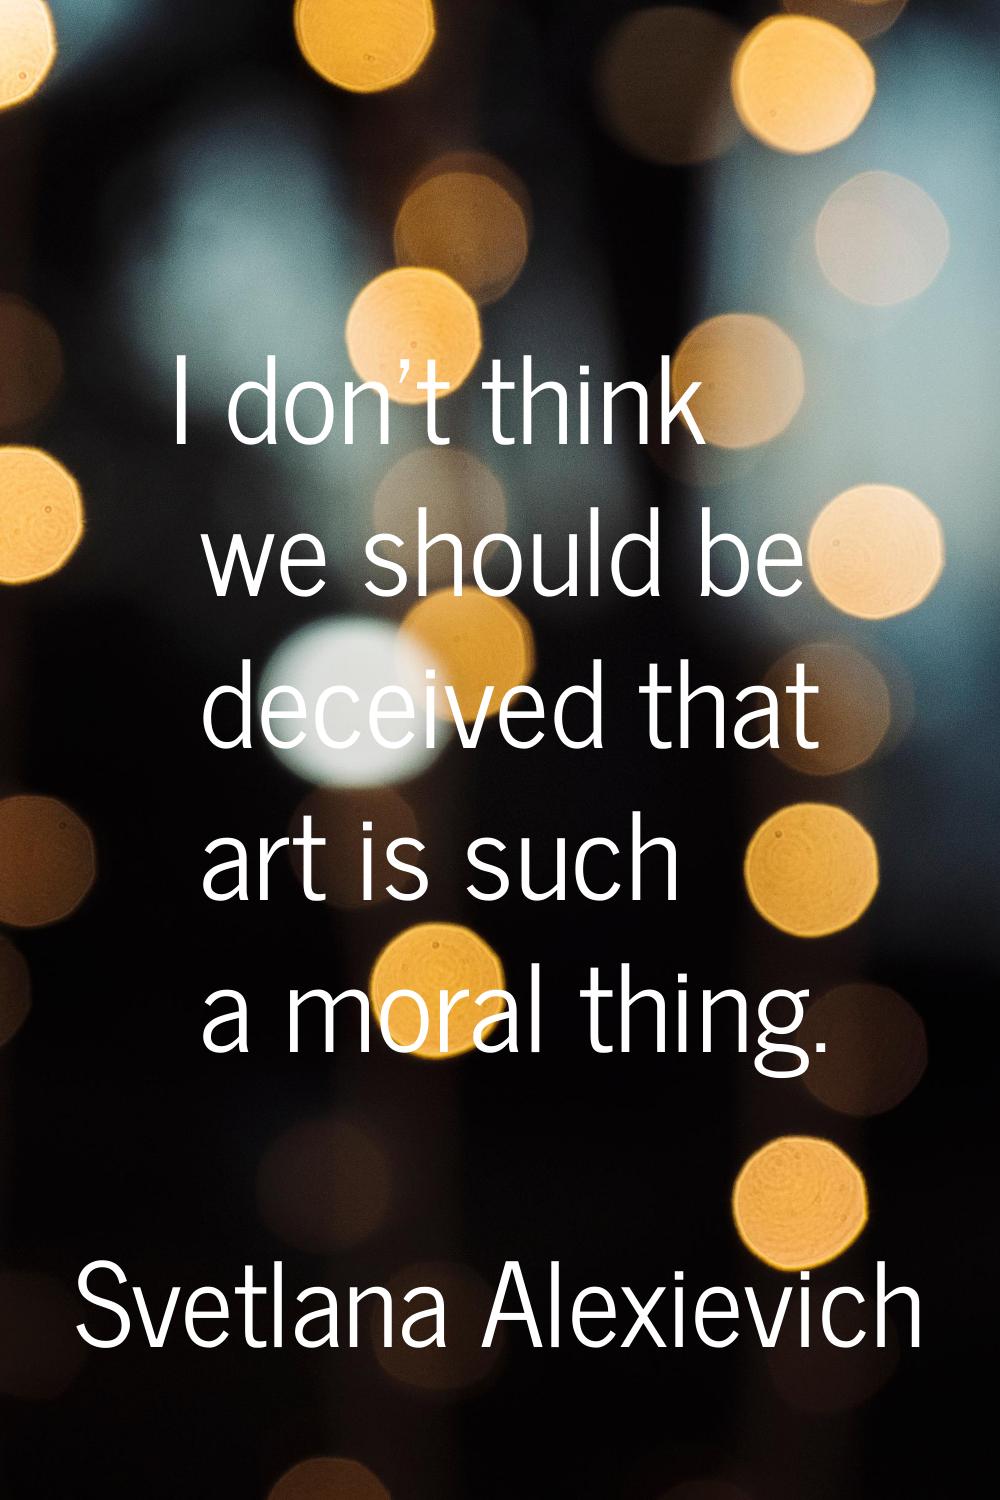 I don't think we should be deceived that art is such a moral thing.